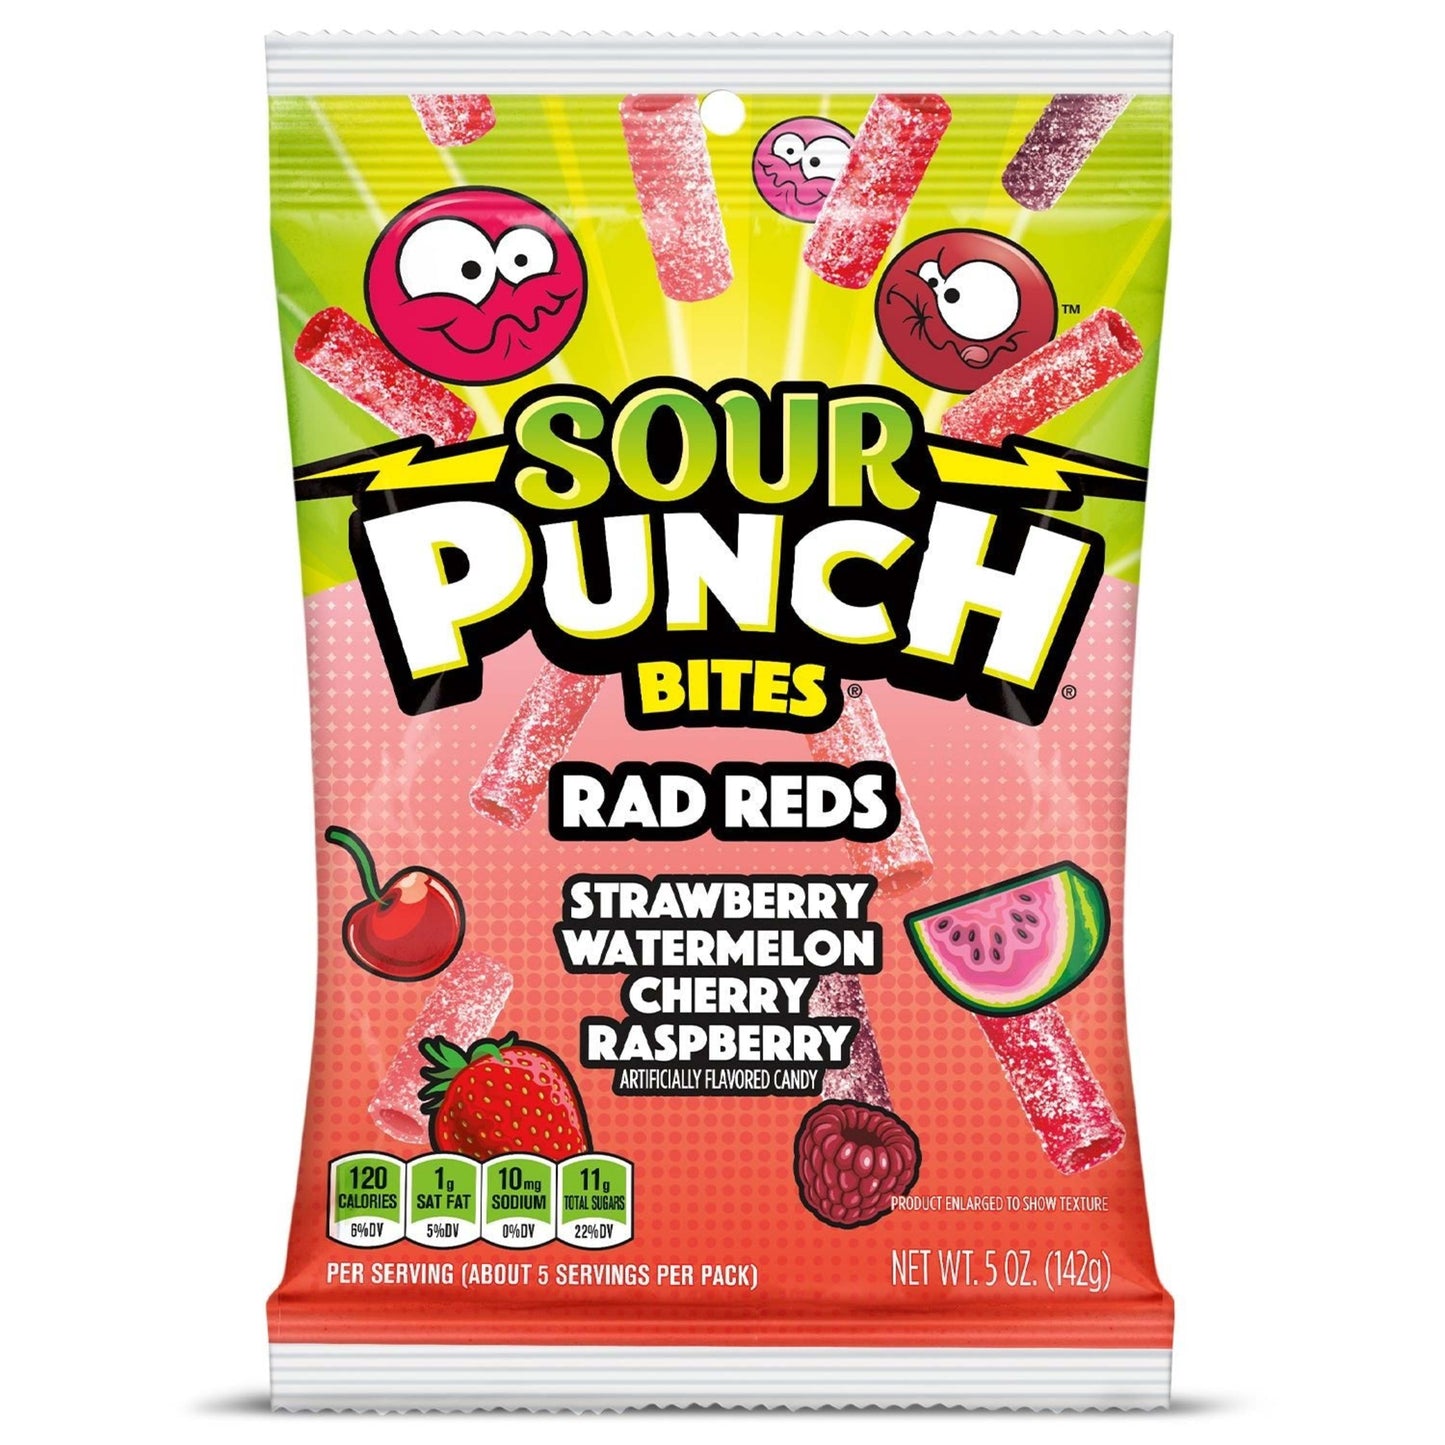 Sour Punch Rad Reds Front of Package - Sour Punch Red Candy - Red Sour Punch Bites